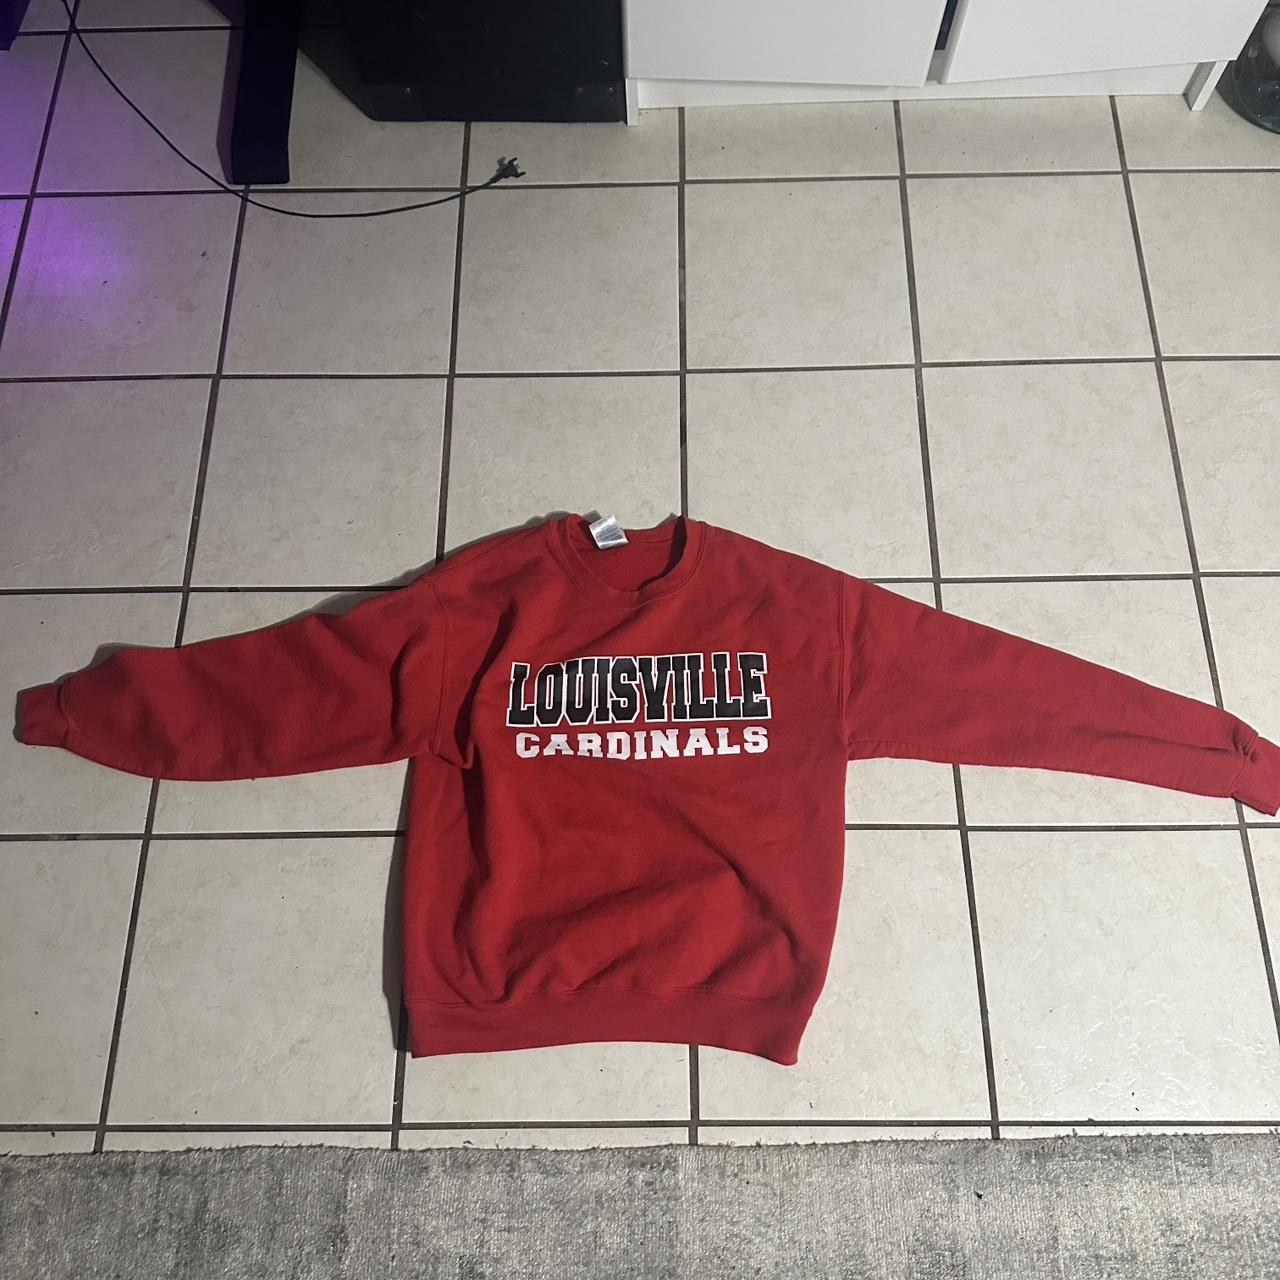 louisville hoodie, size medium, a tiny stain on the - Depop